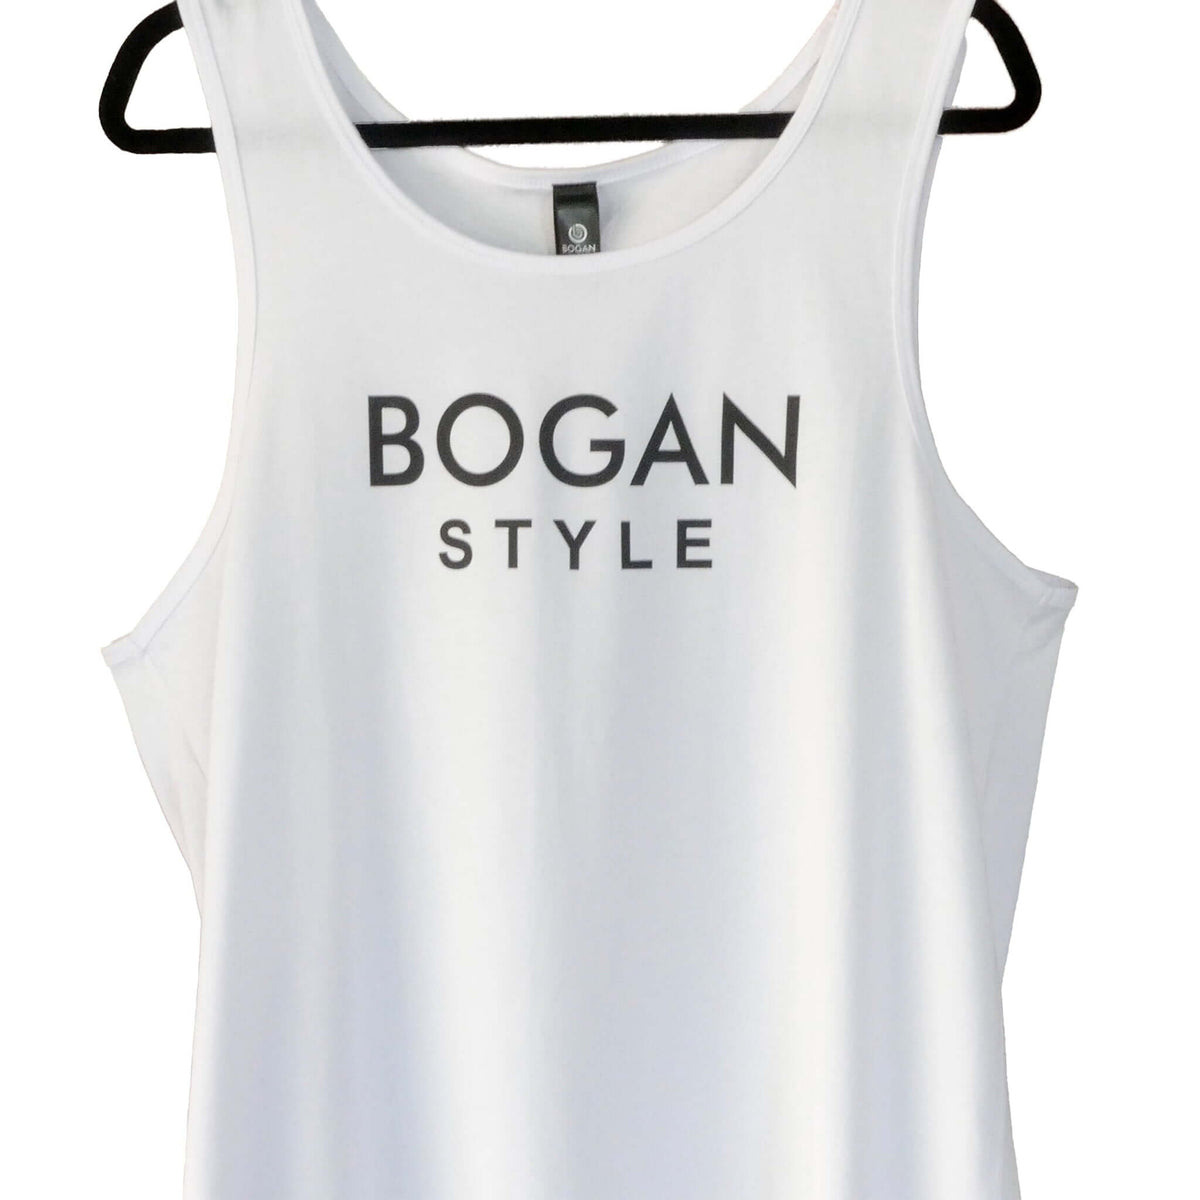 White tank top wth Bogan Style printed on the front